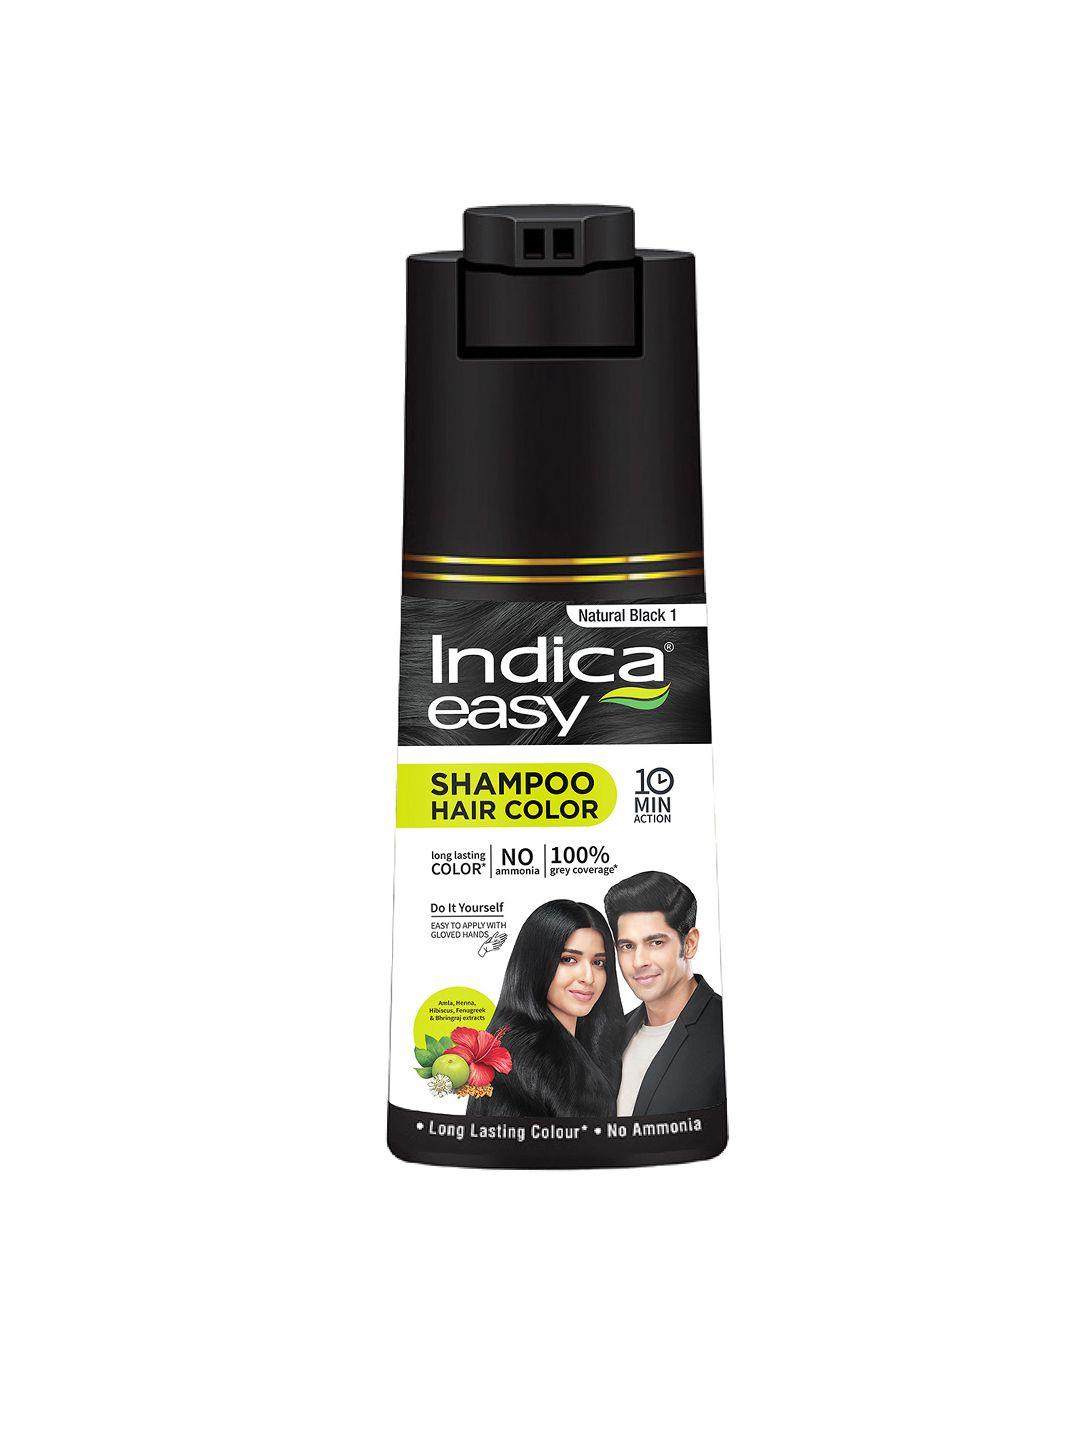 indica easy do-it-yourself hair color shampoo pump pack - natural black 1 - 180 ml